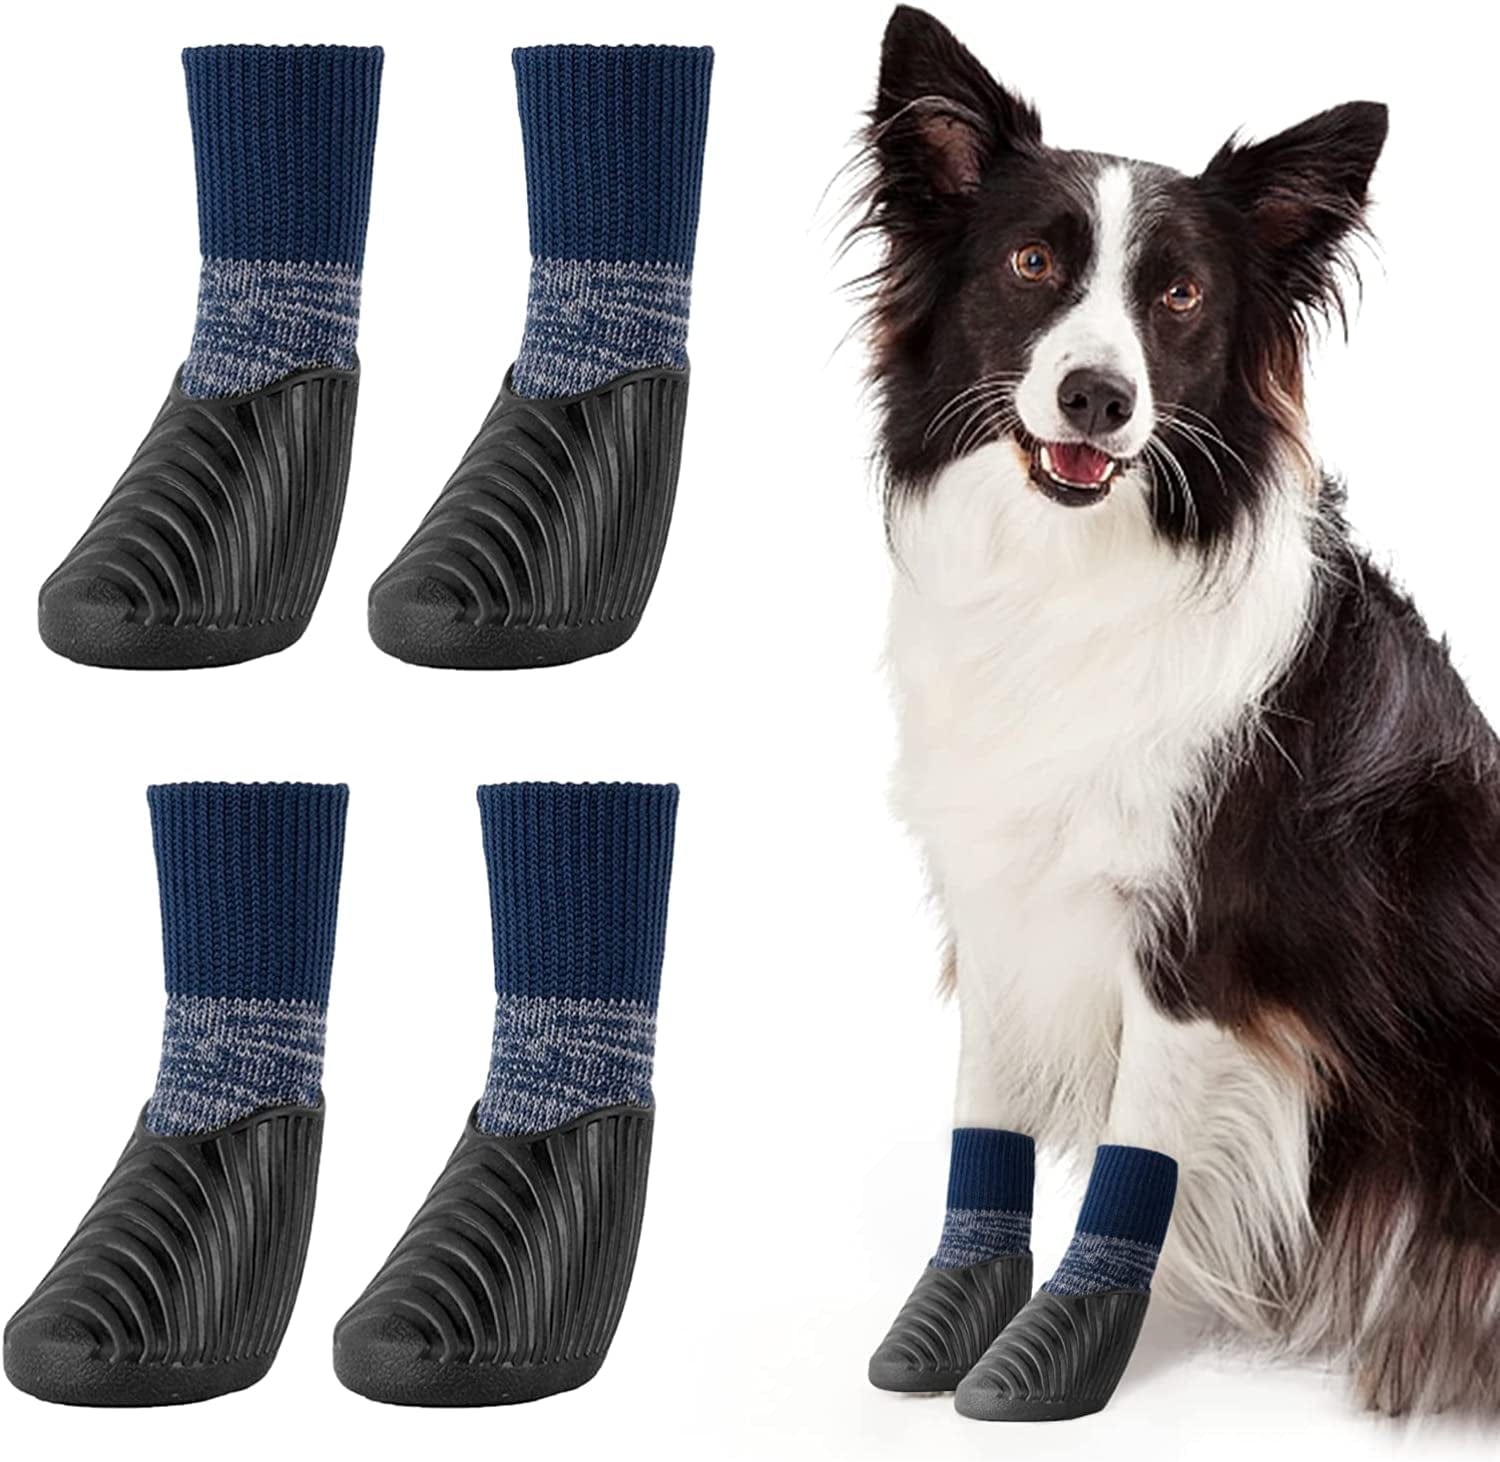 Dog Boots, Shoes & Socks, Paw Protection